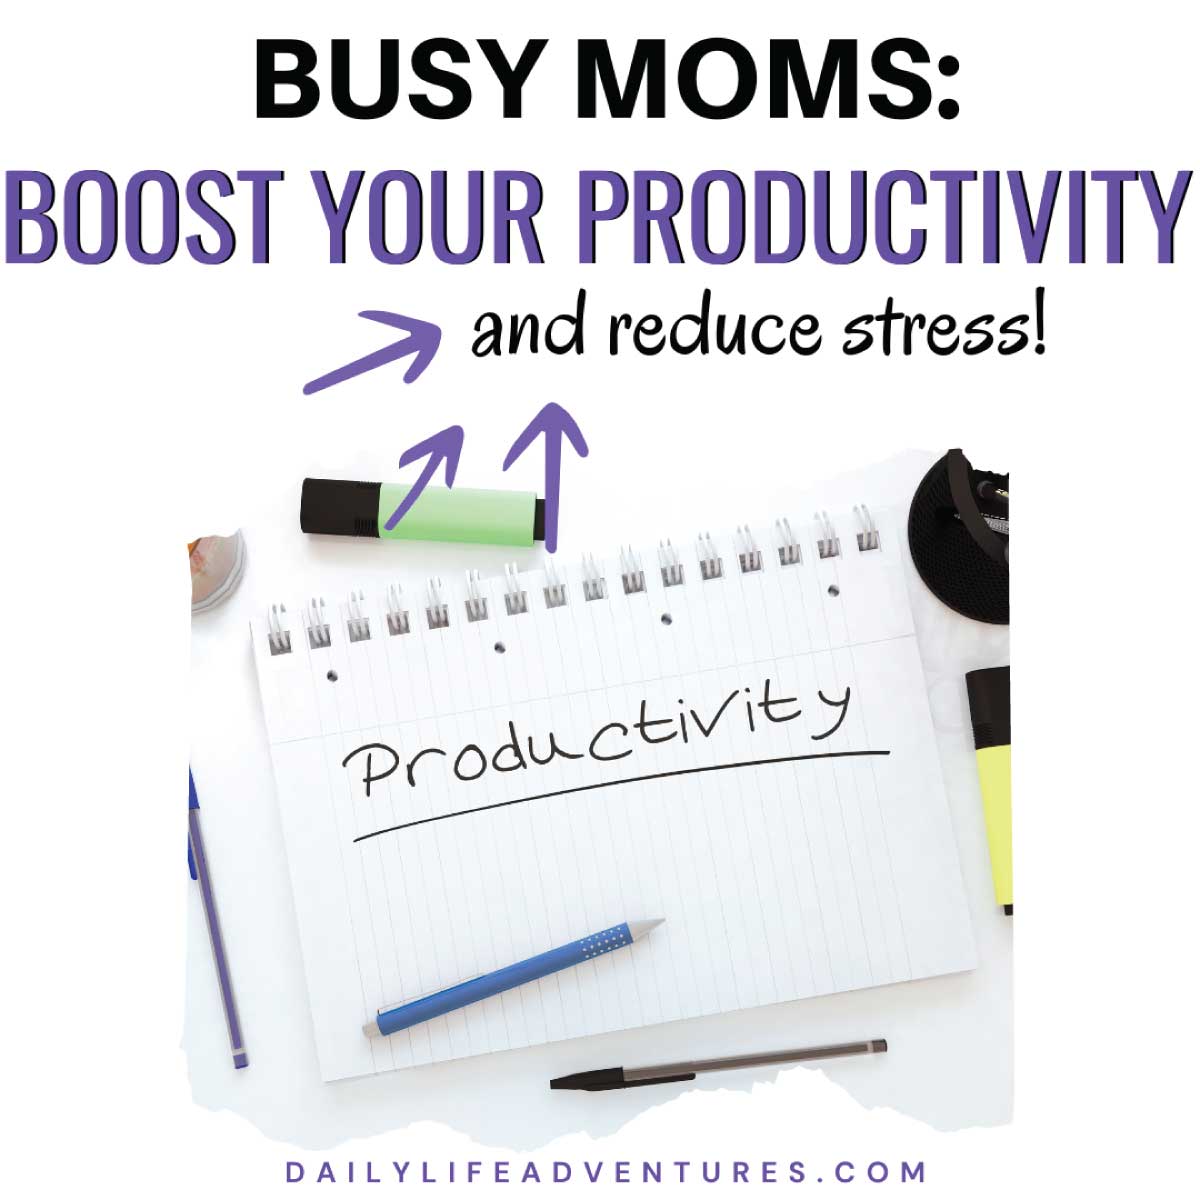 10 Ways to Boost Your Productivity as a Busy Mom